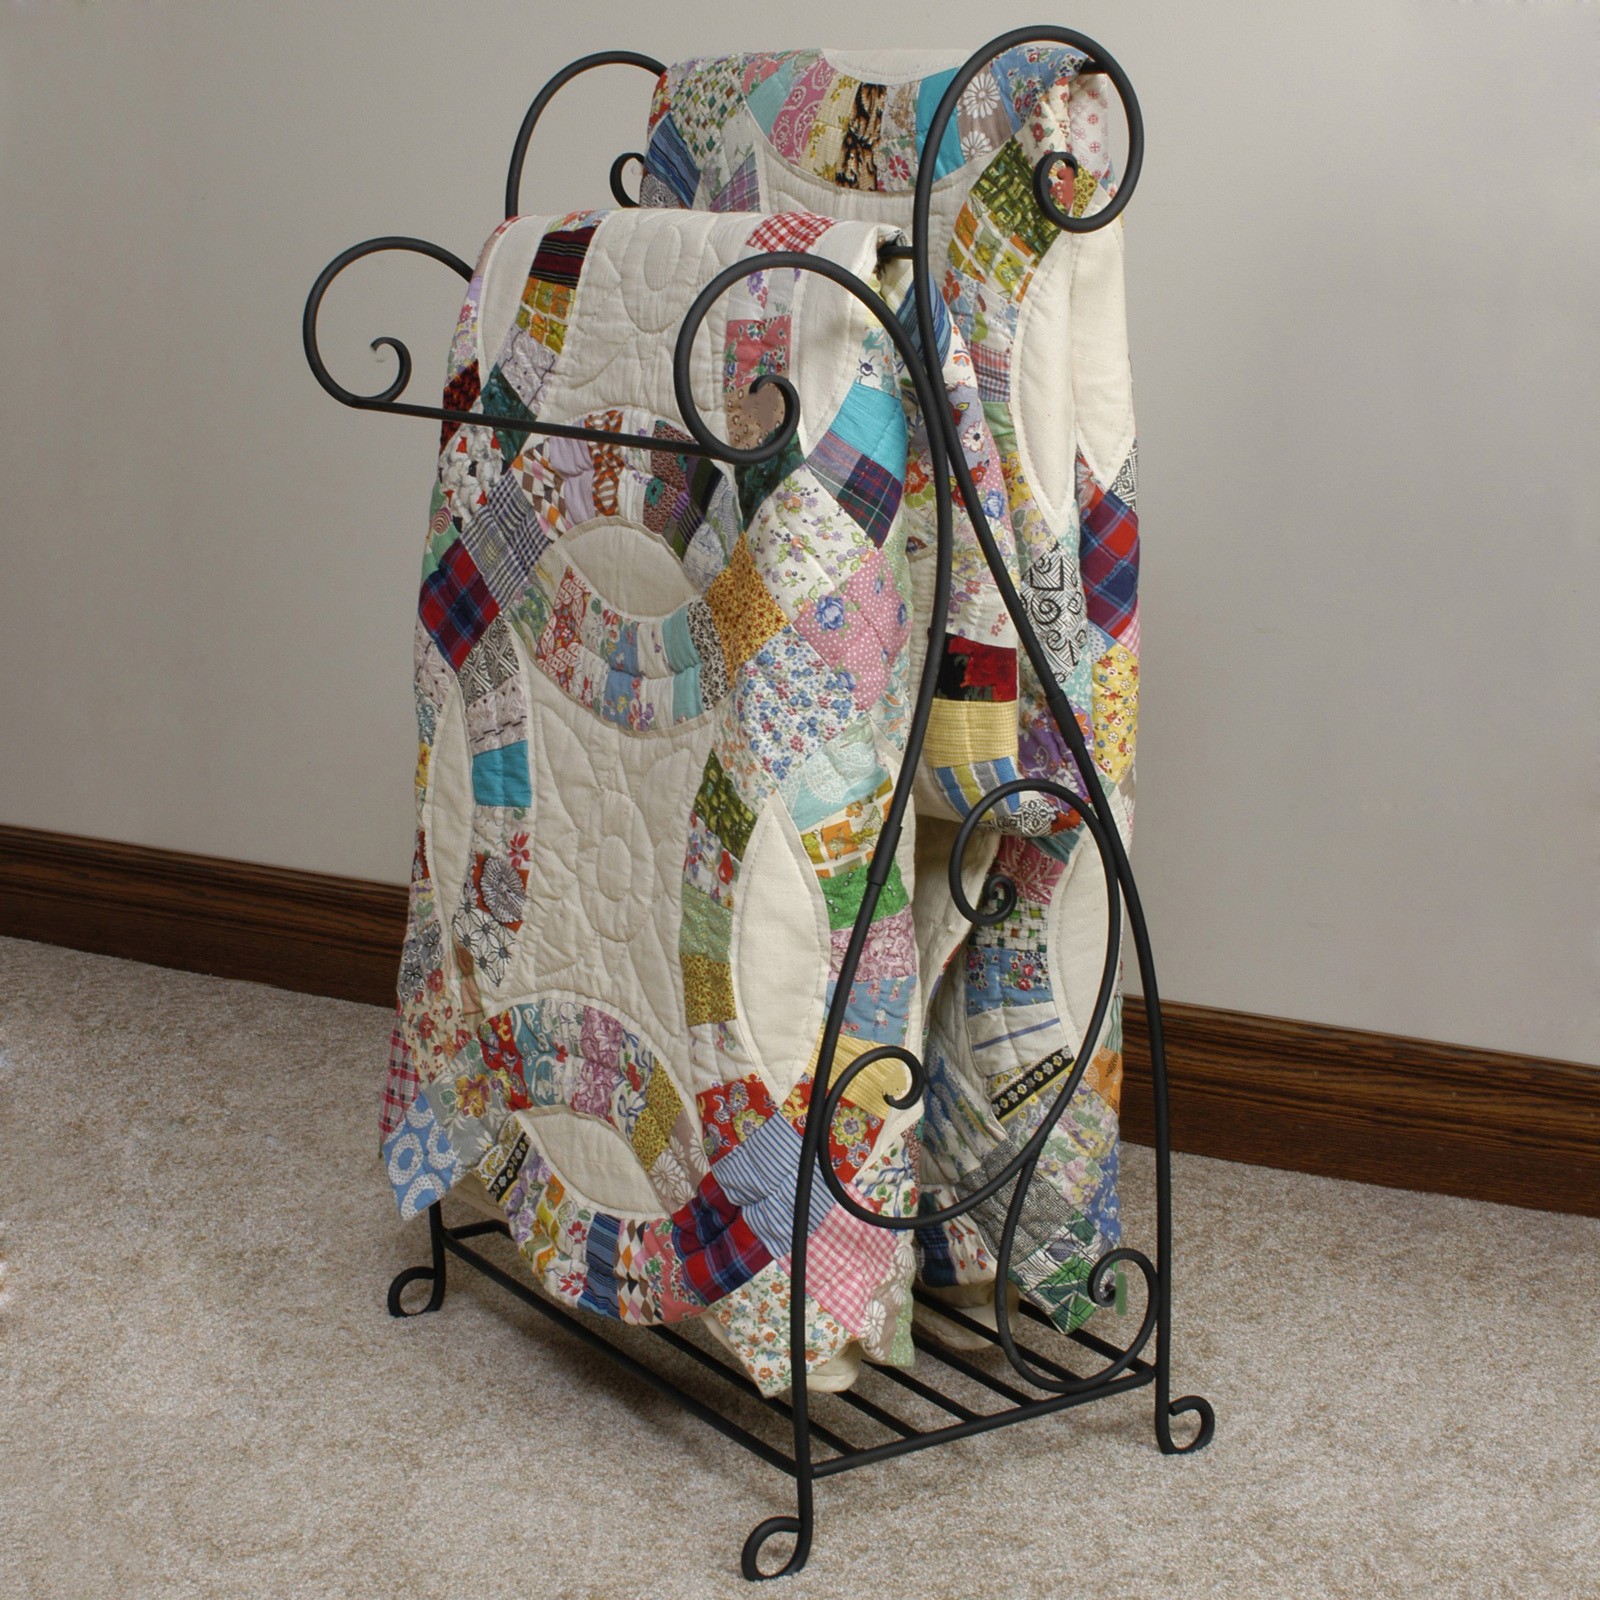 J j wire scrolled wrought iron quilt rack quilt racks